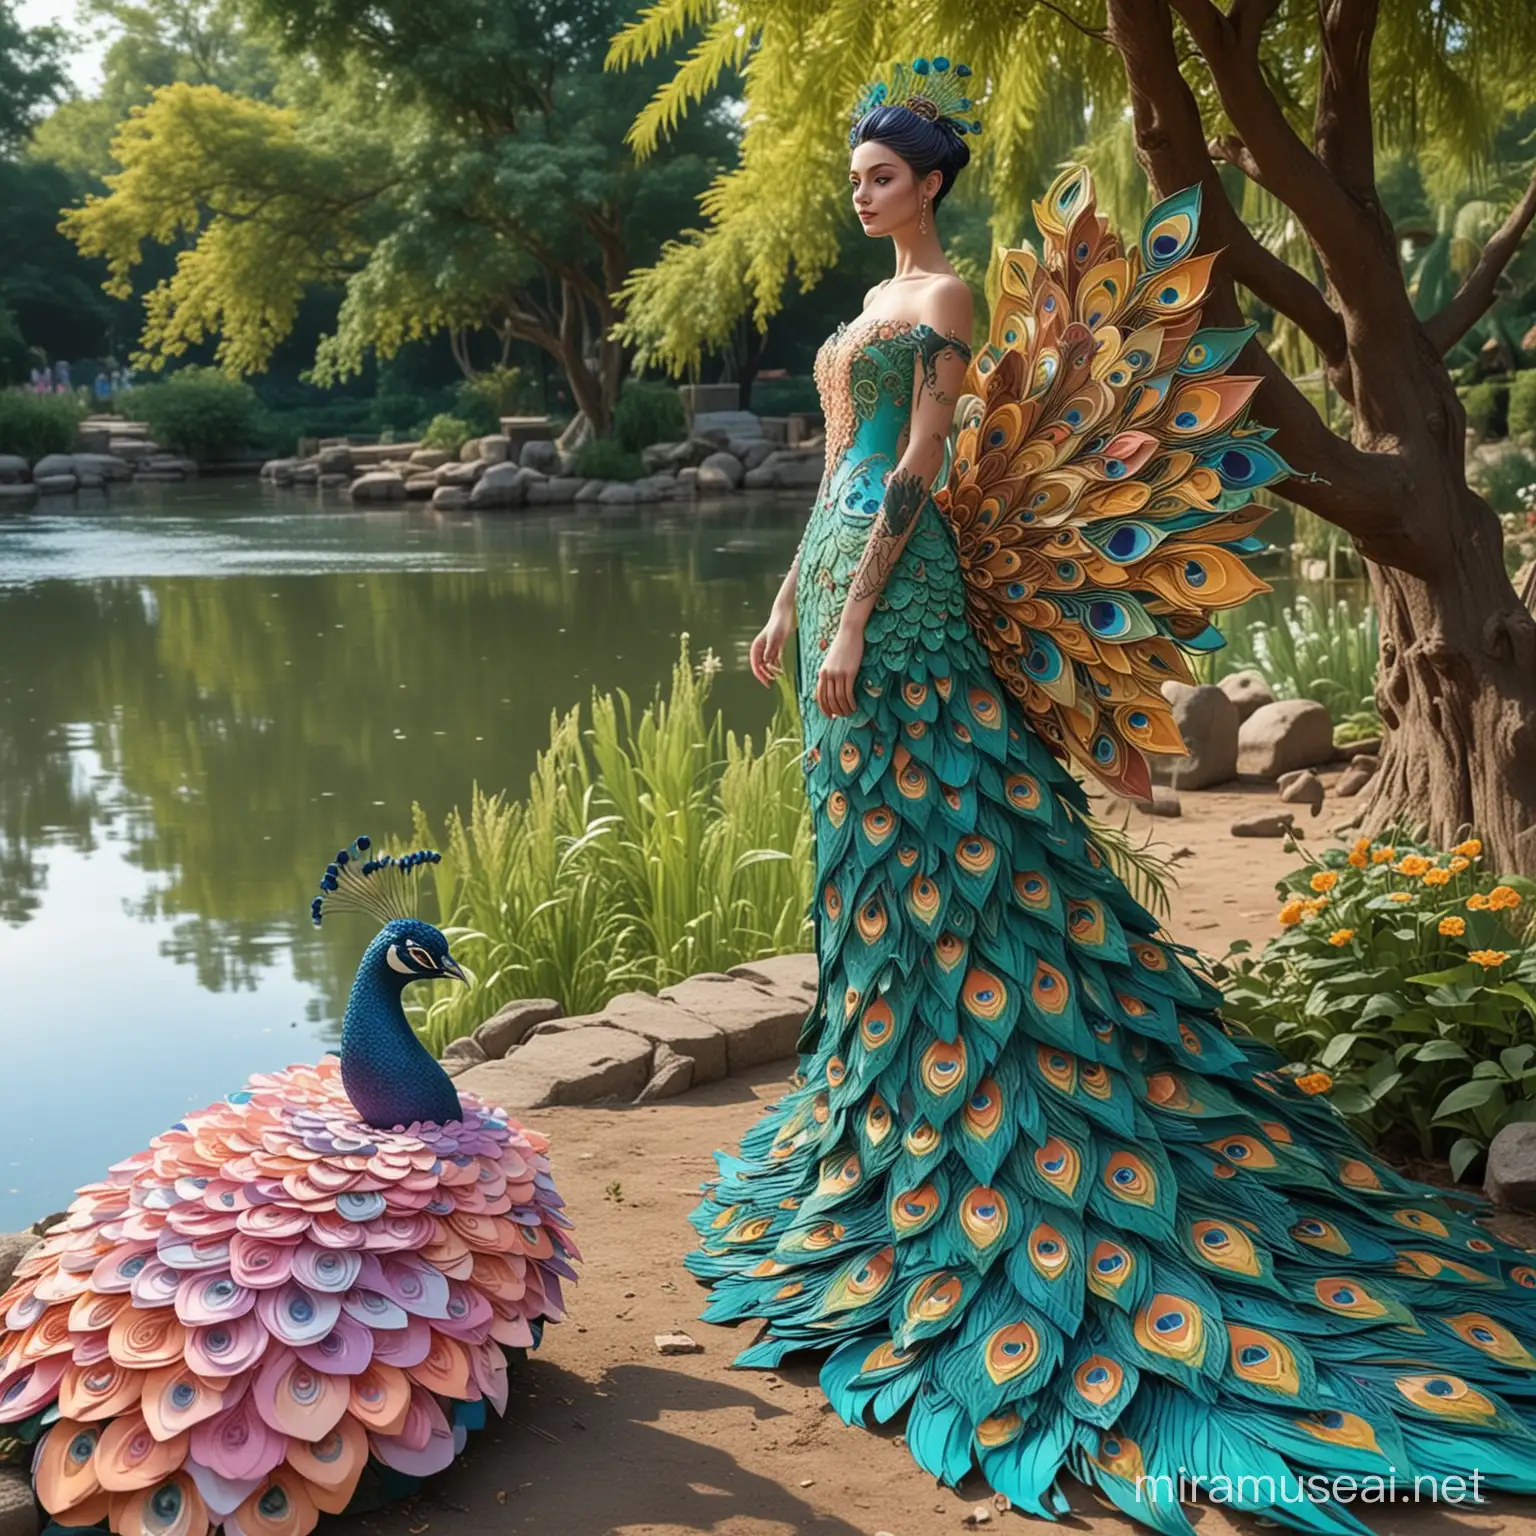 Realistic Human Peacock in a Whimsical Paper Wonderland